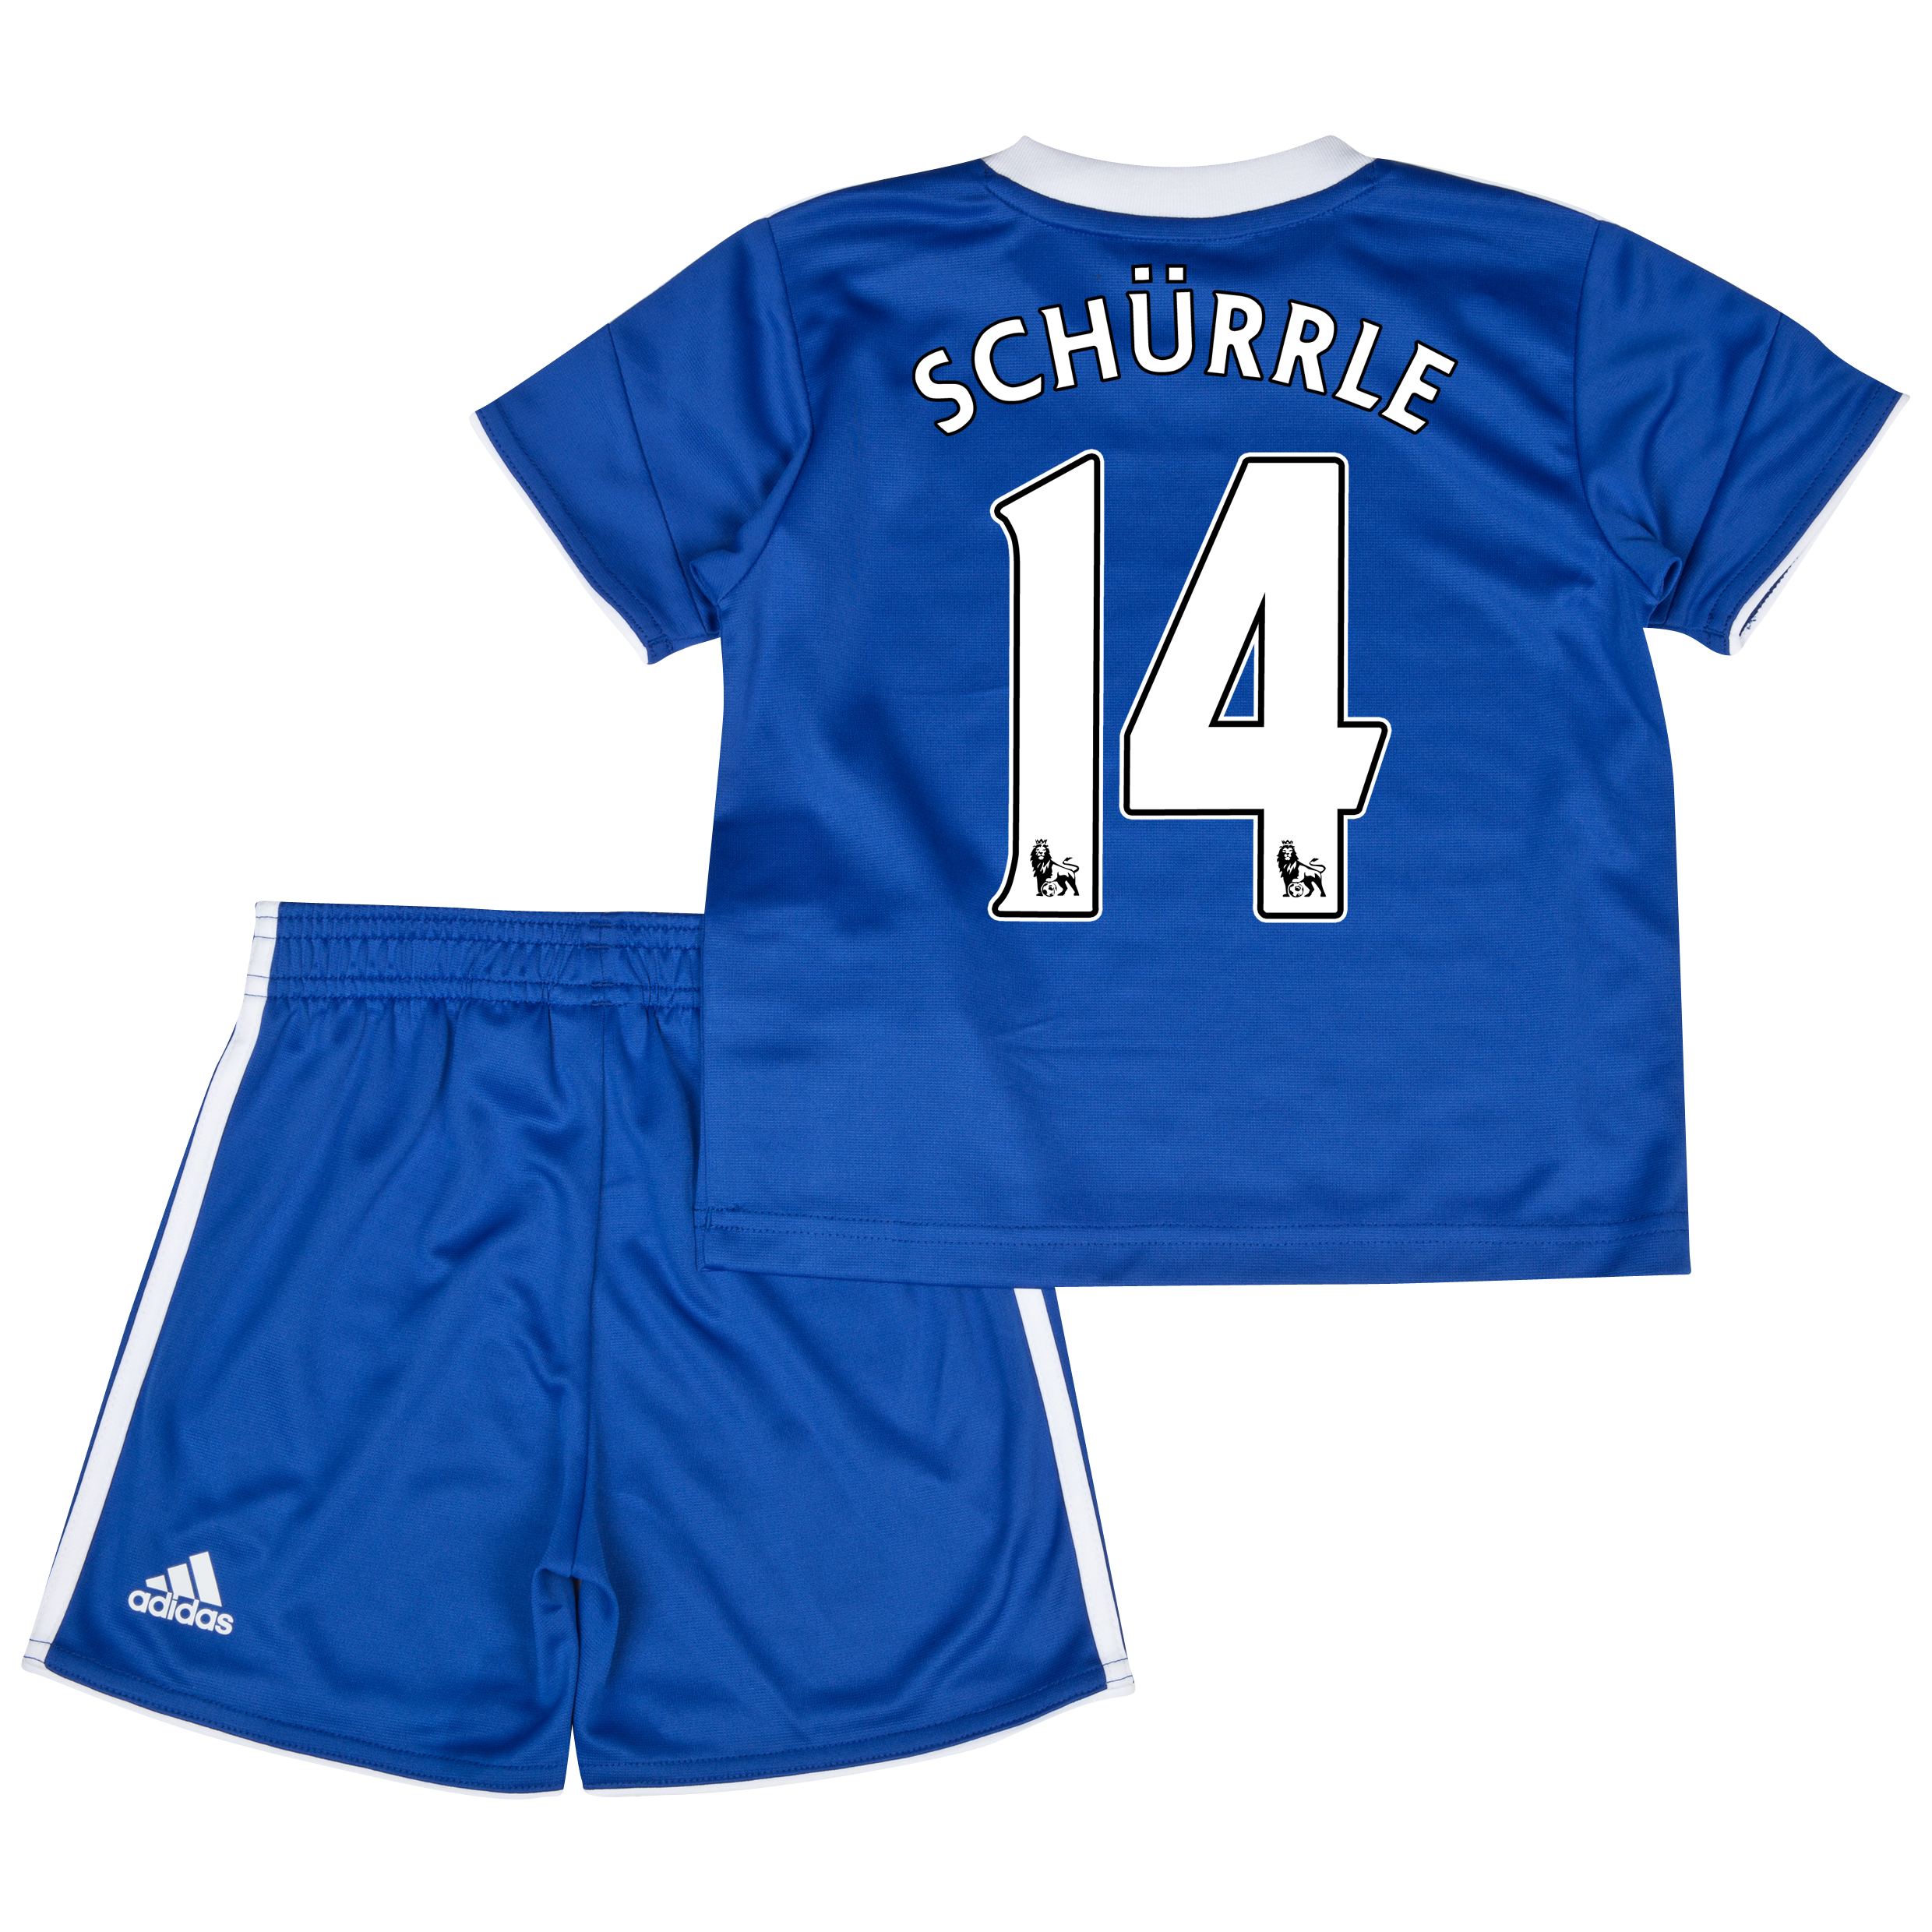 Chelsea Home Mini Kit 2013/14 with Schürrle 14 printing